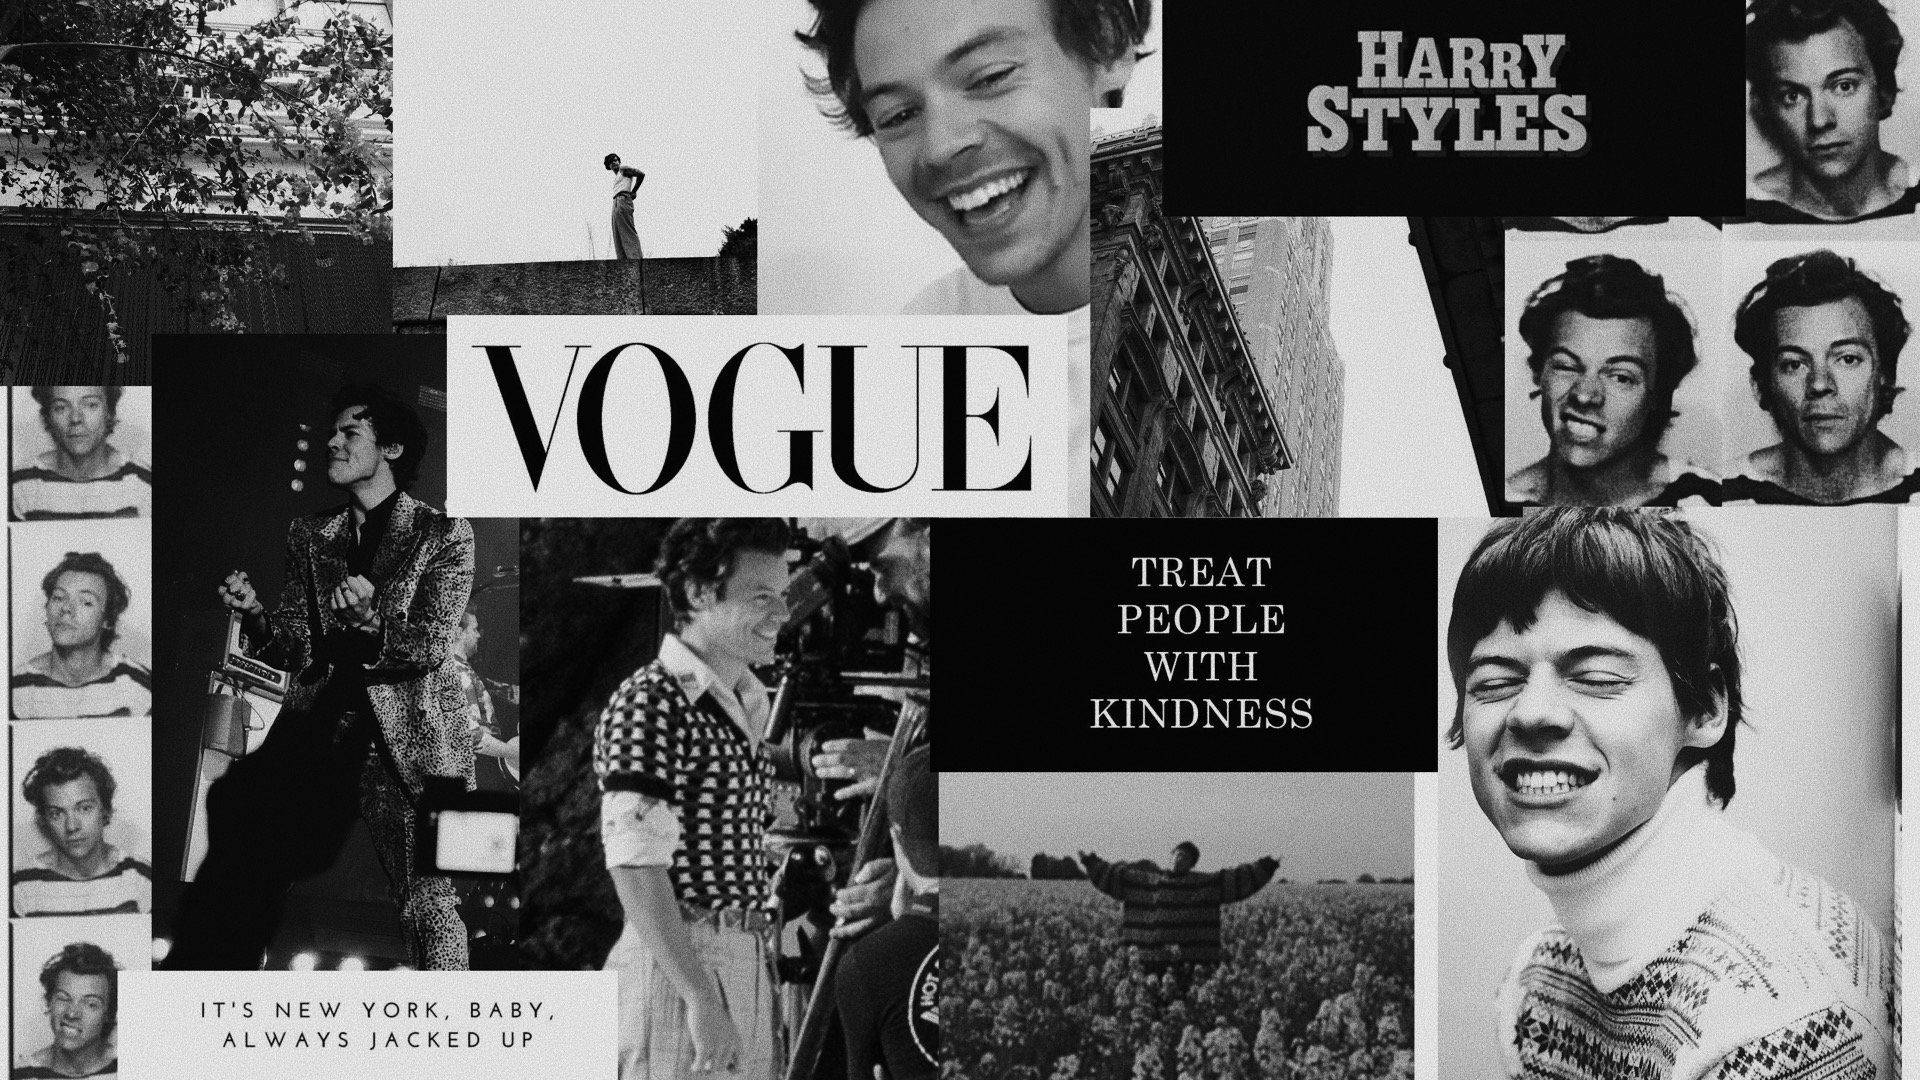 Harry Styles Vogue Collage